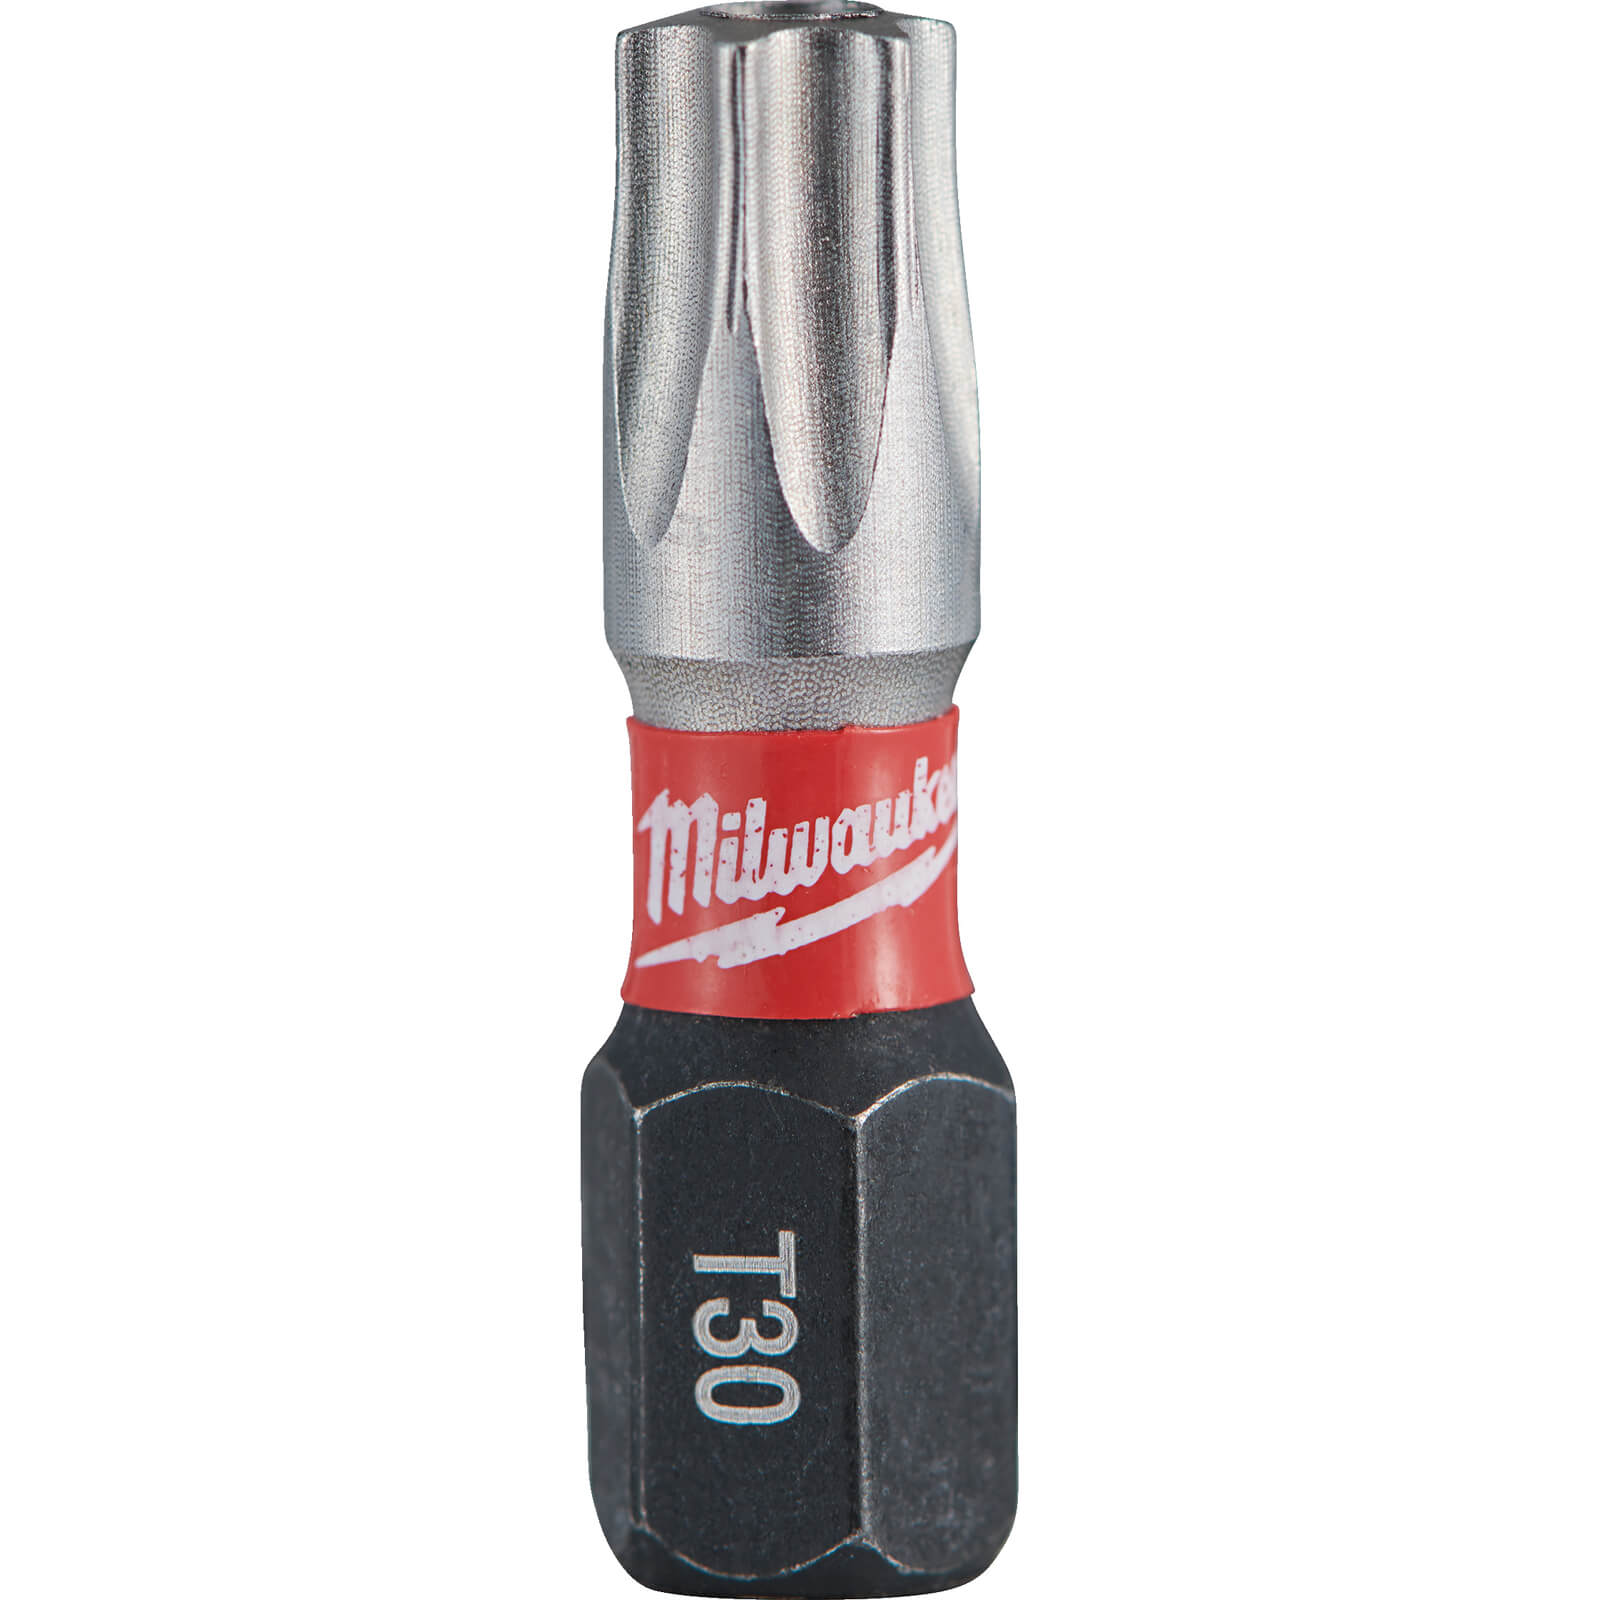 Image of Milwaukee Shockwave Impact Duty Security Torx Screwdriver Bits TX BO30 25mm Pack of 2